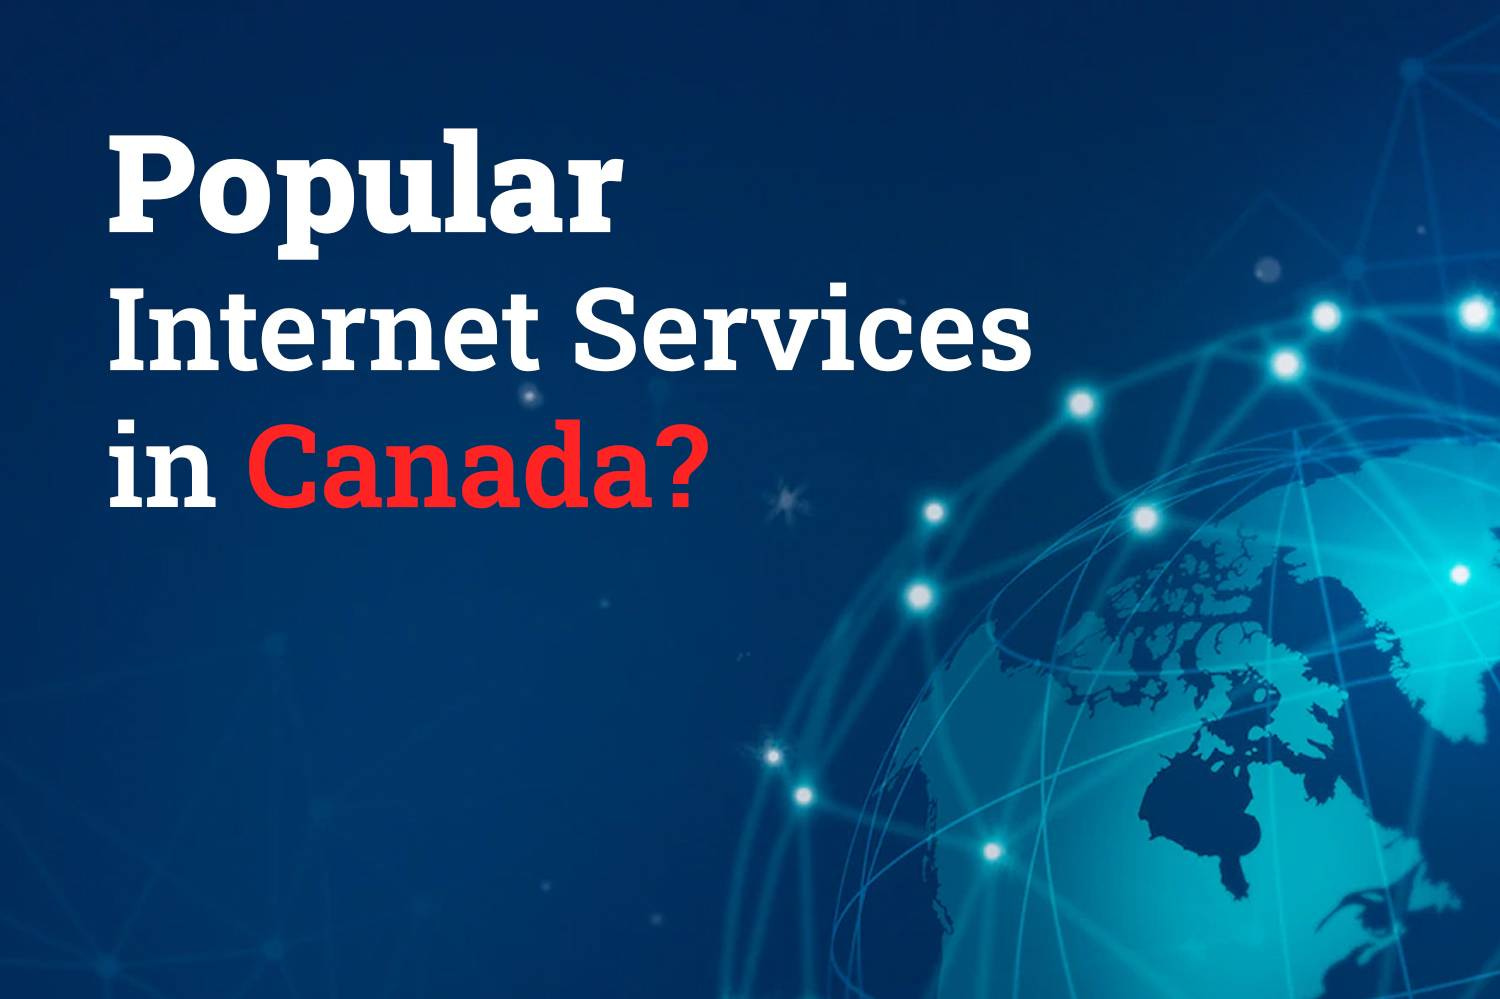 List of most popular internet services in Canada